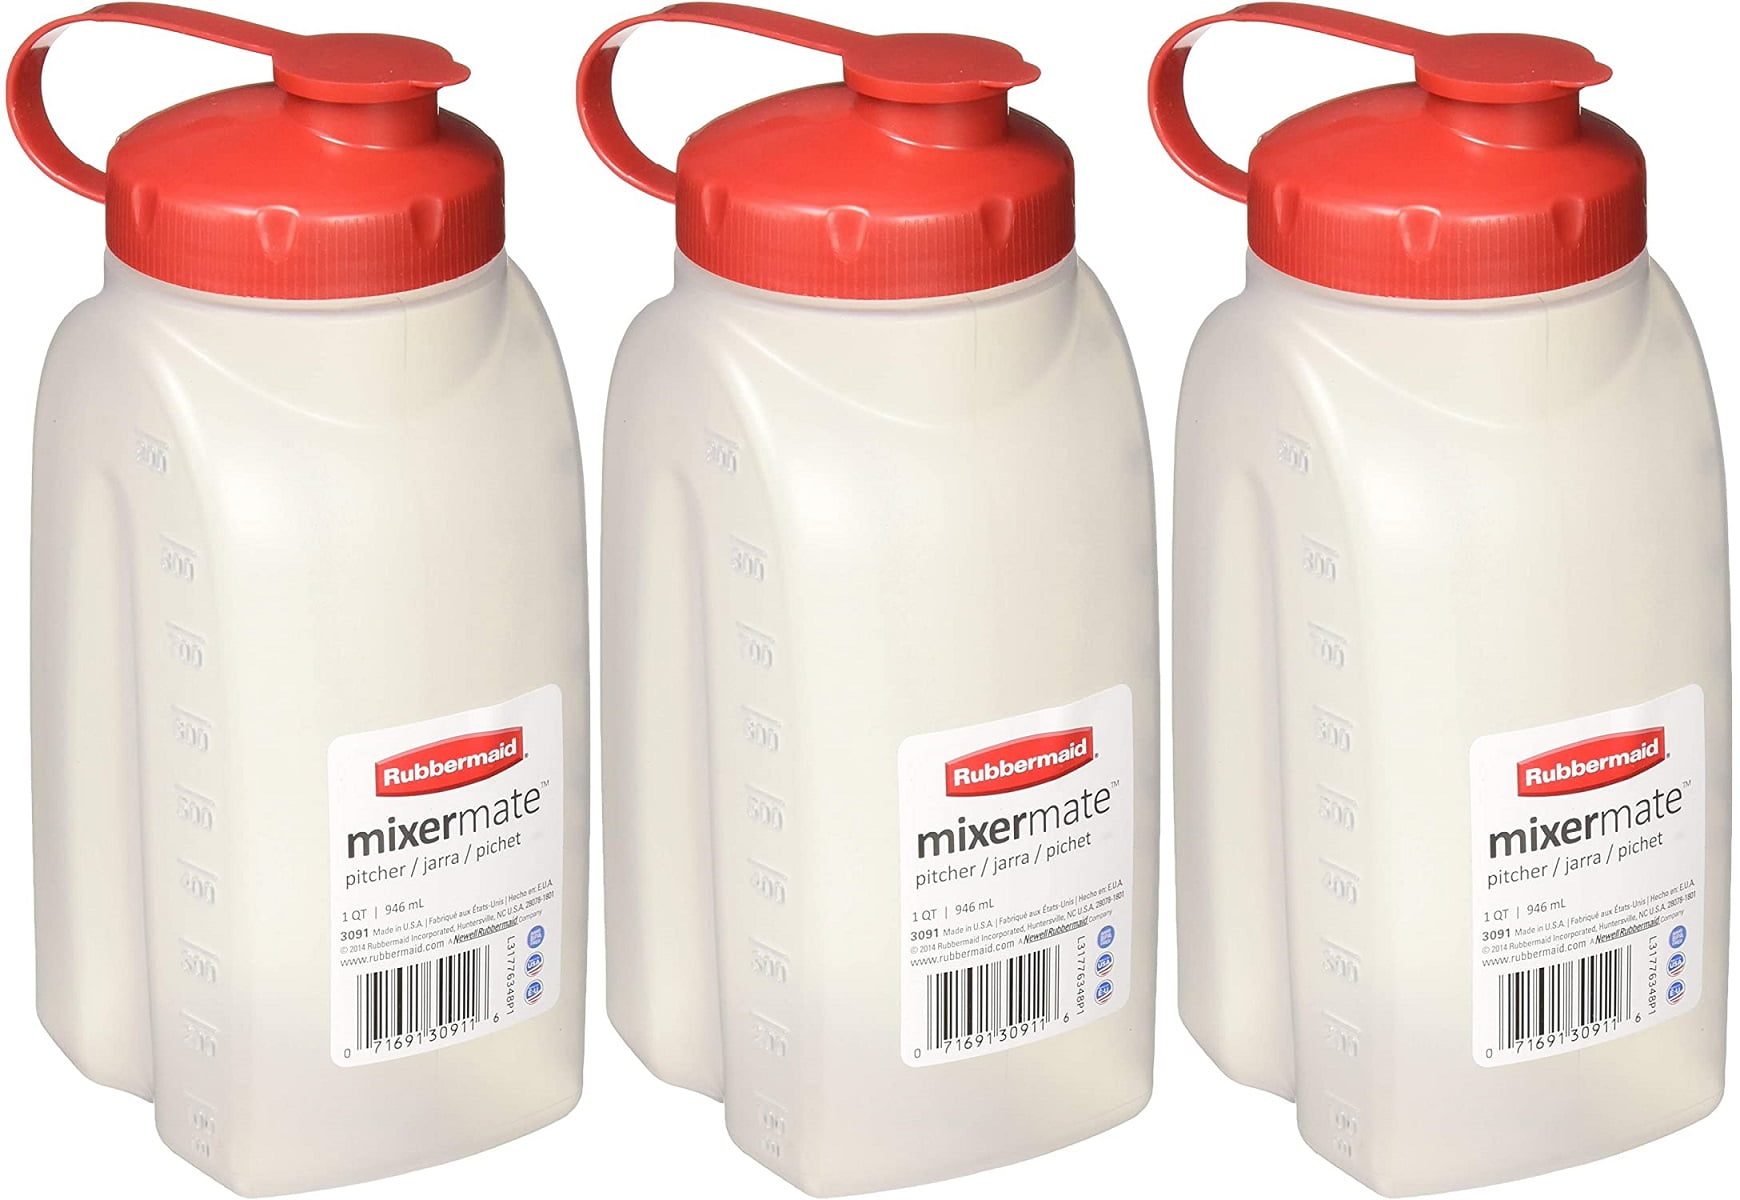 Rubbermaid - MixerMate Servin' Saver Beverage Container in White(1PT /473  mL)